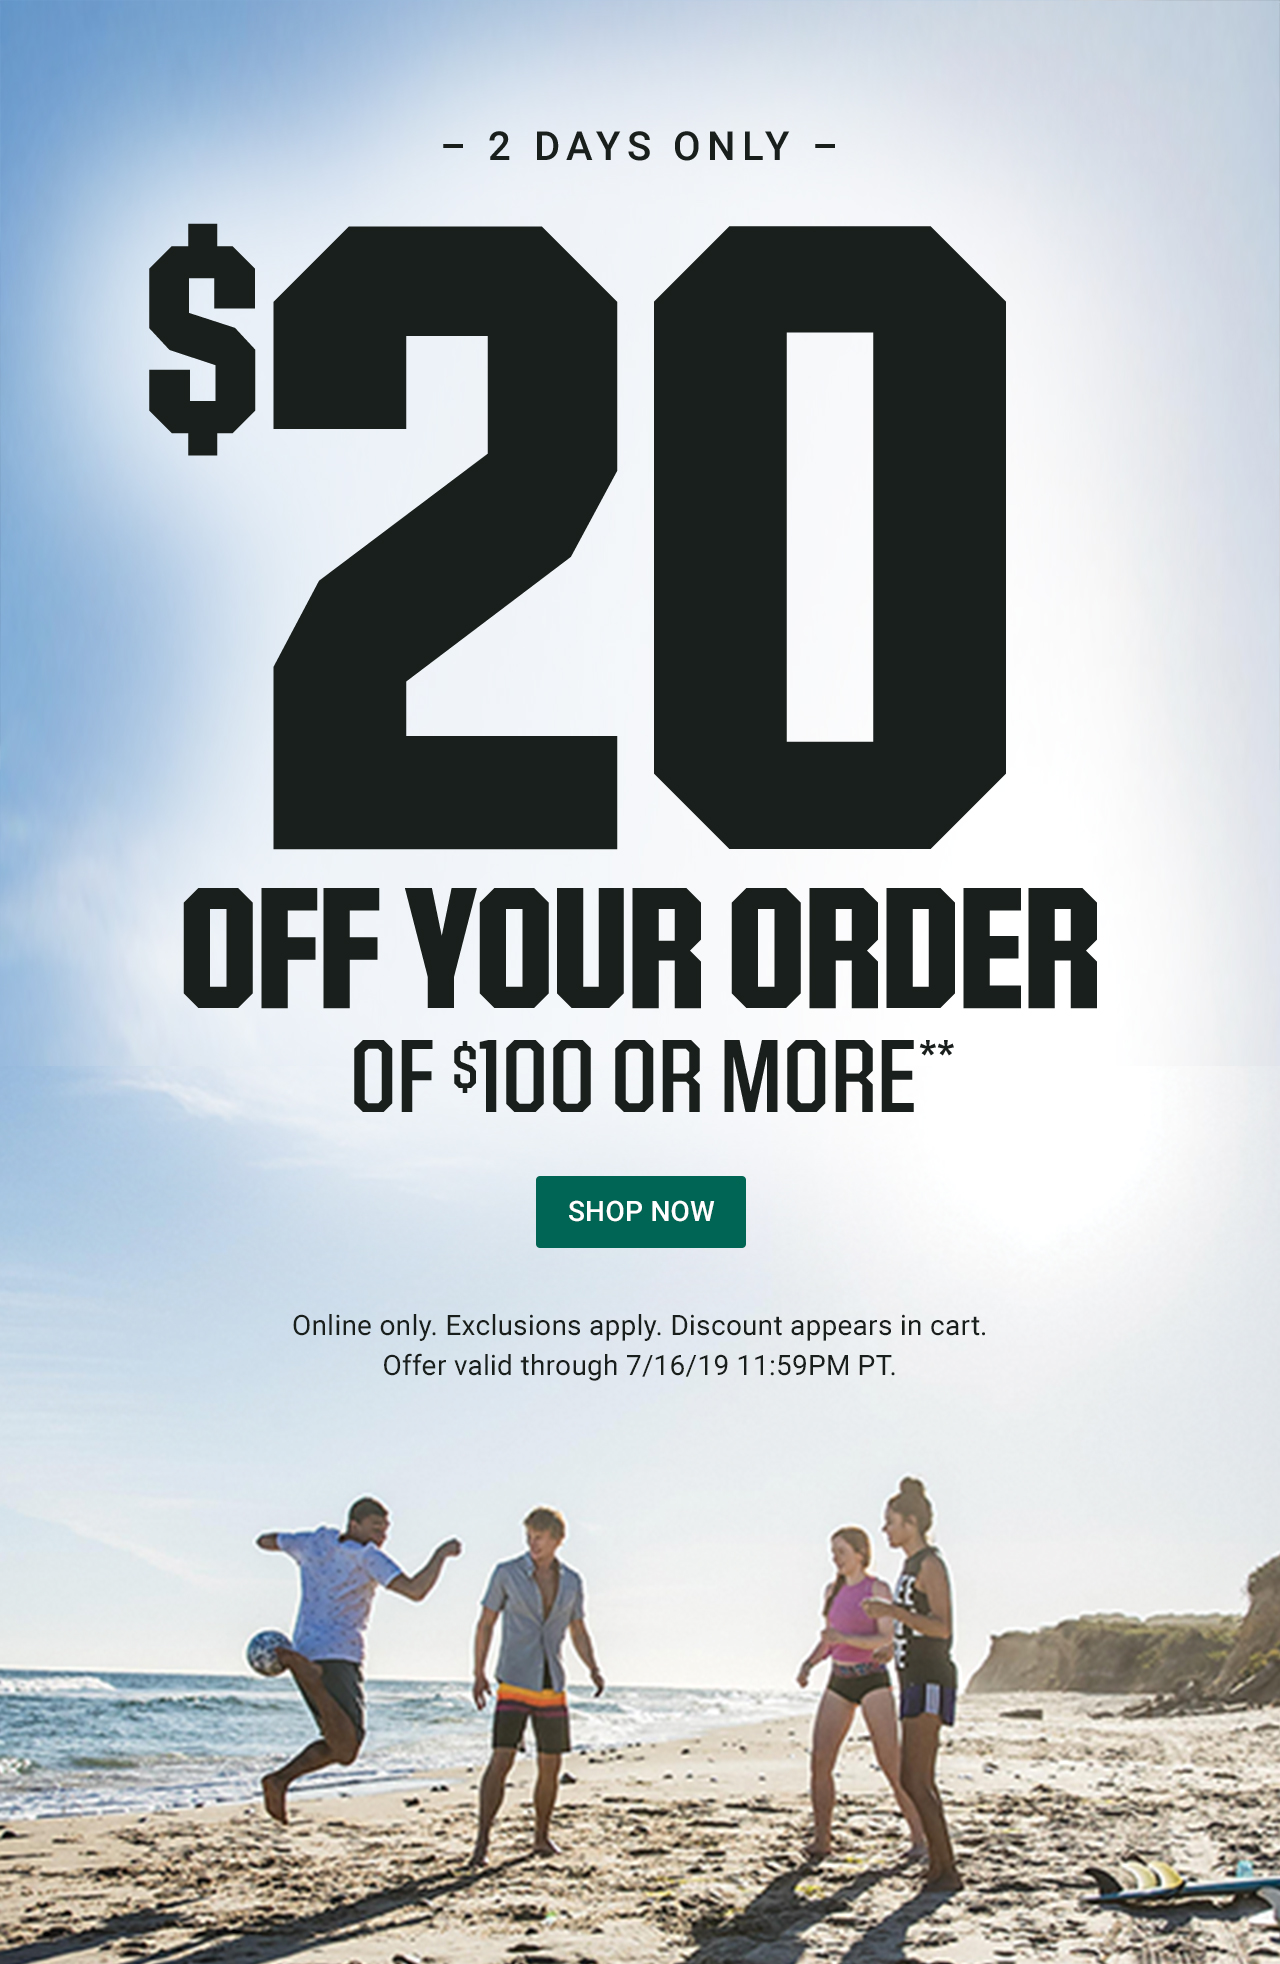 Limited time! Take $20 off your order of $100 or more.** Online only. Exclusions apply. Discount appears in cart. Valid through 7/16/19. Missed this offer? You can still shop this week's deals!